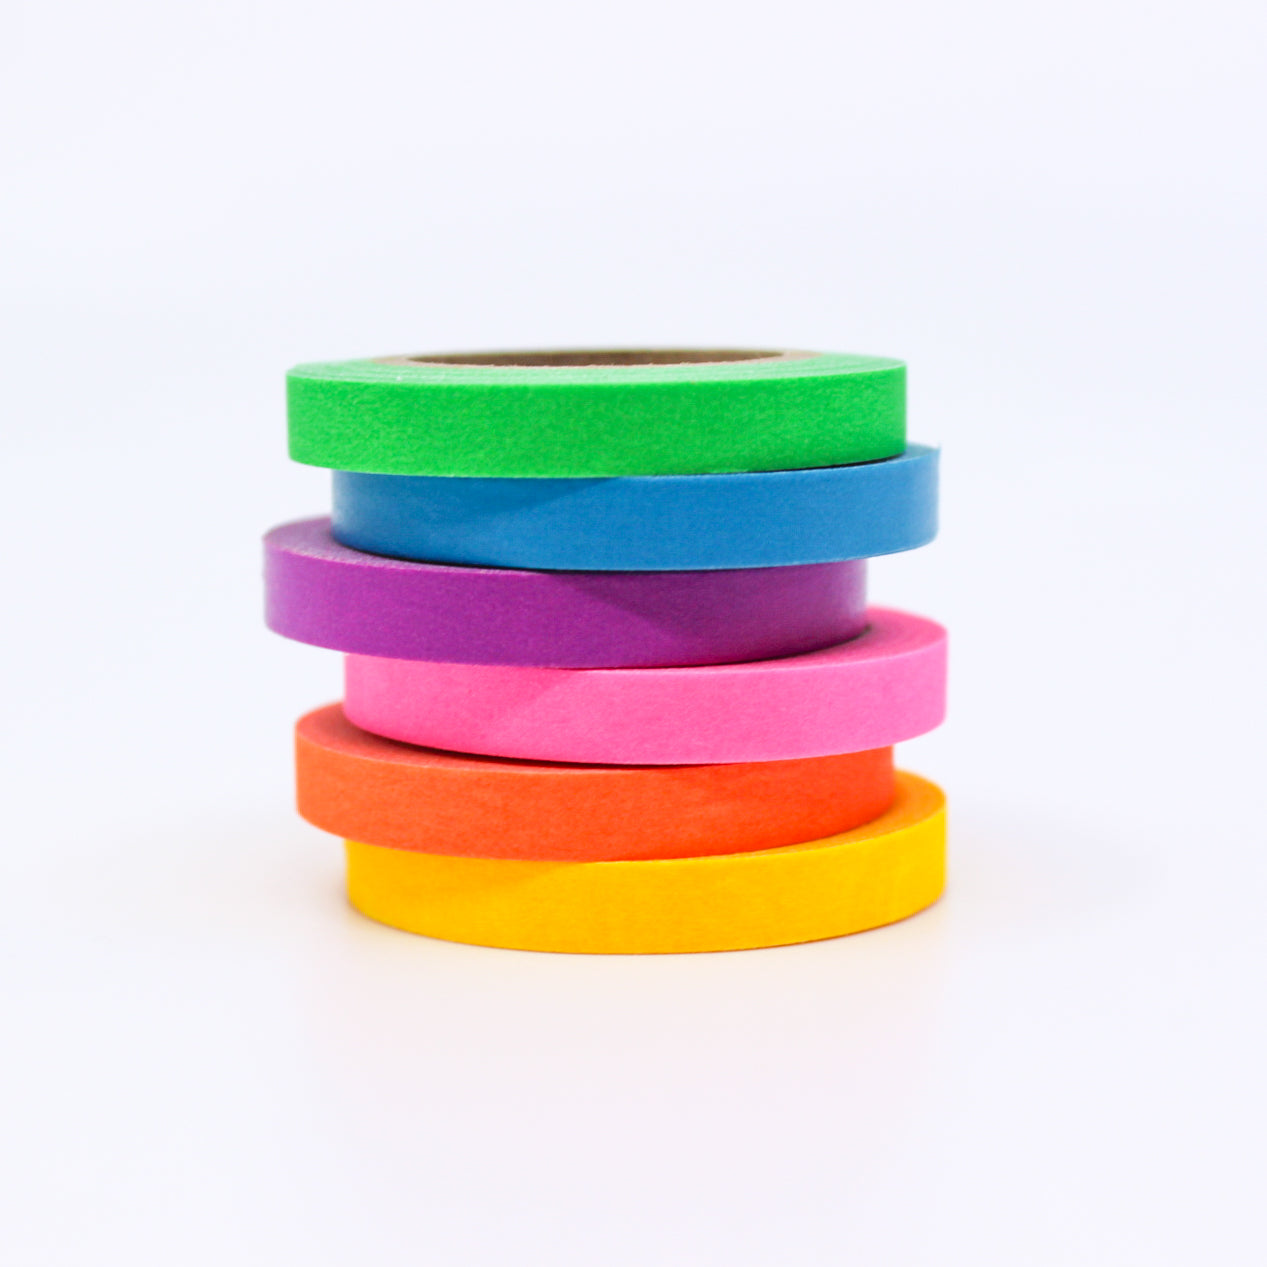 Brighten up your crafts with our Neon Color Narrow Solid Washi Tape Set. This set includes a selection of narrow washi tapes in vivid neon colors, perfect for adding a bold and electrifying touch to your projects. This tape is sold at BBB Supplies Craft Shop.